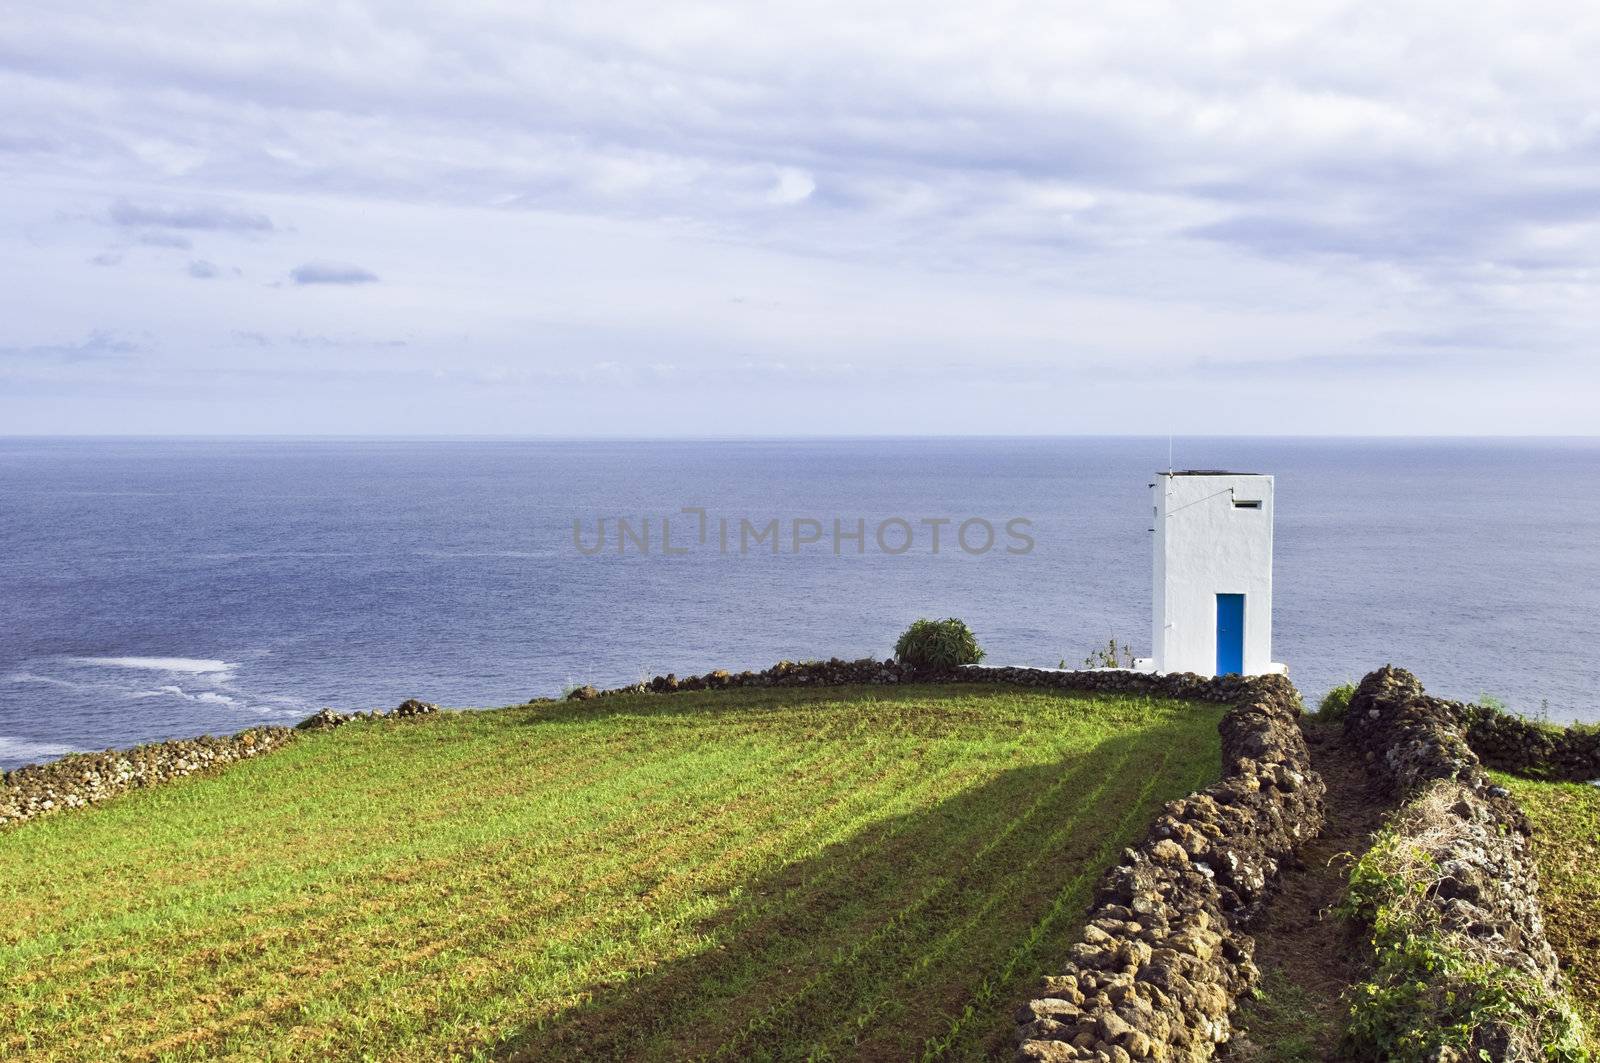 Whale watch tower in Pico, Azores by mrfotos